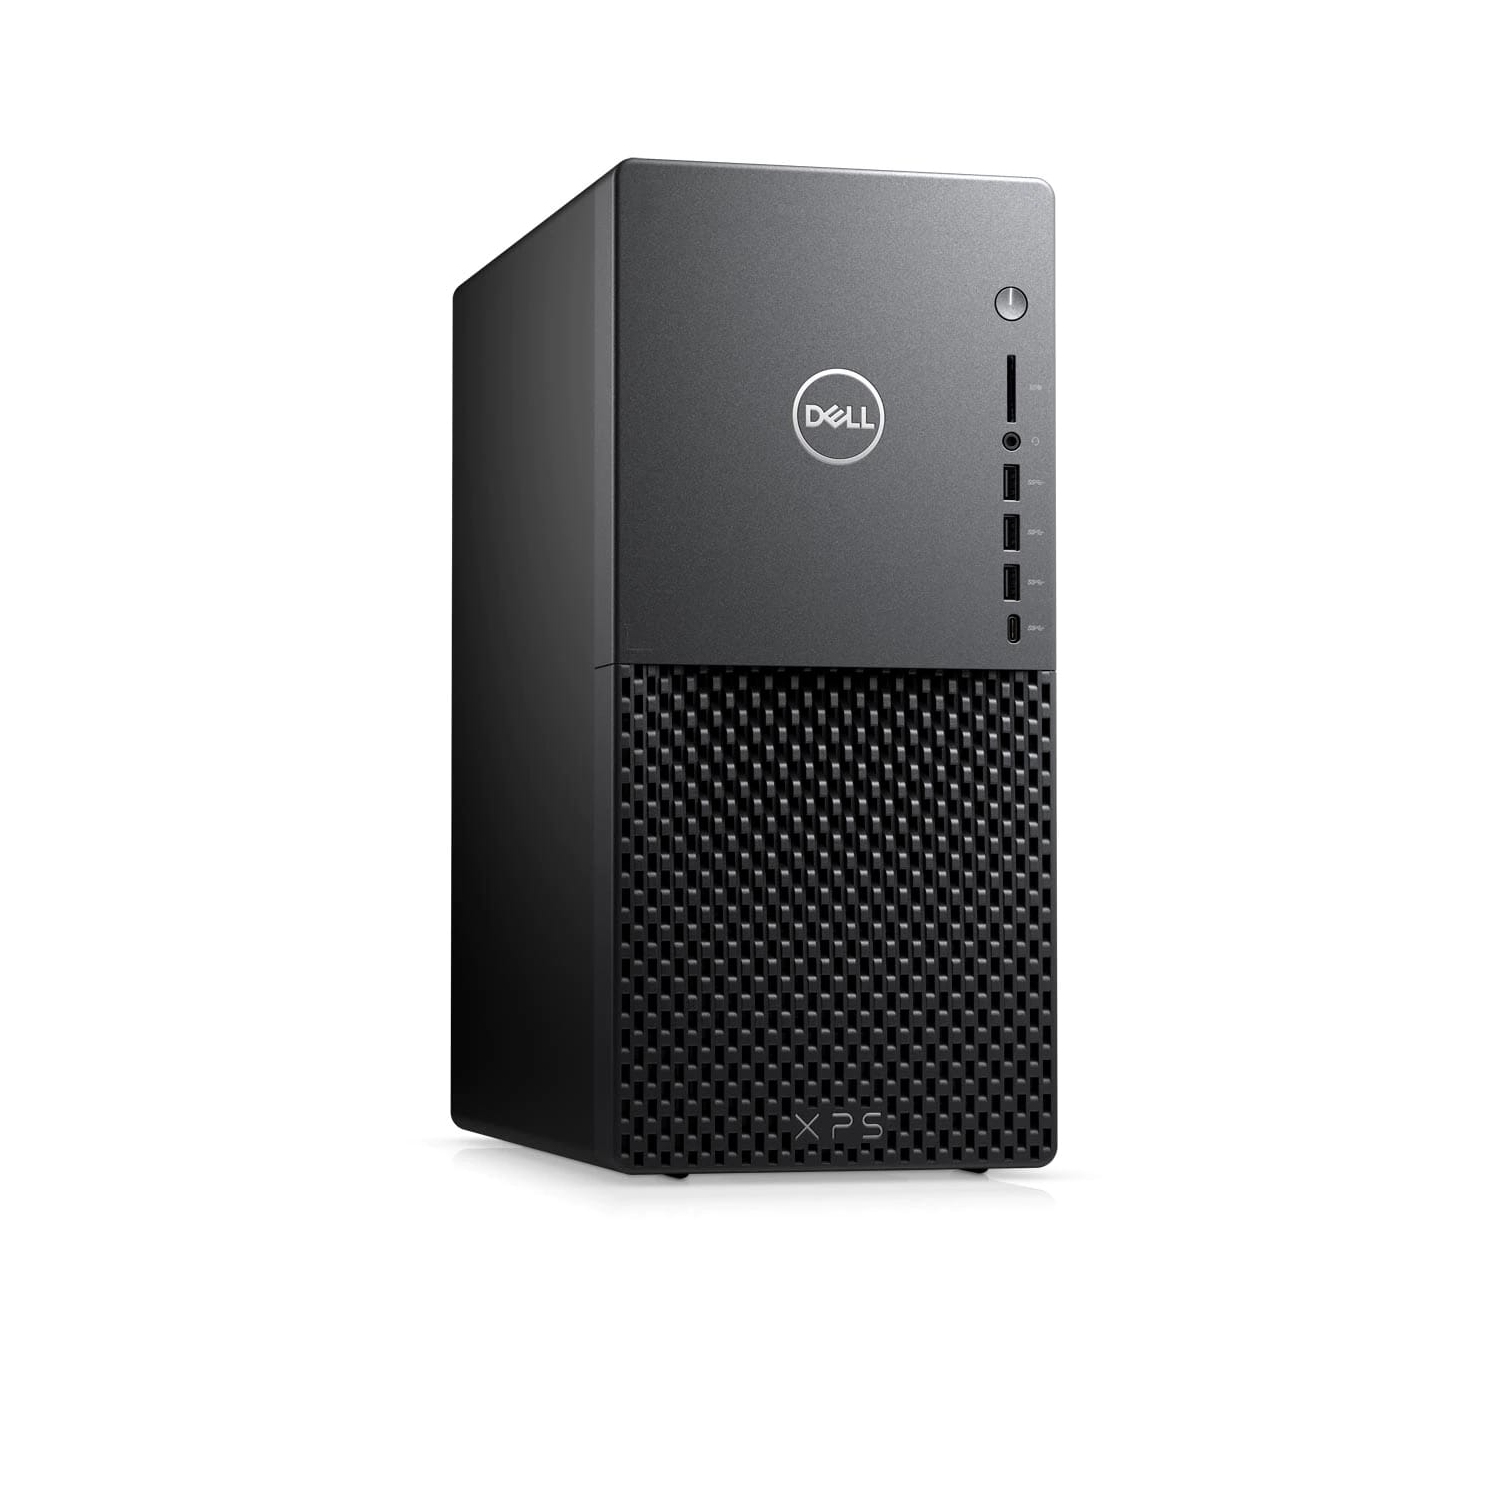 Refurbished (Excellent) - Dell XPS 8940 Desktop (2020) | Core i7 - 512GB SSD - 8GB RAM - RTX 3070 | 8 Cores @ 4.9 GHz - 11th Gen CPU Certified Refurbished